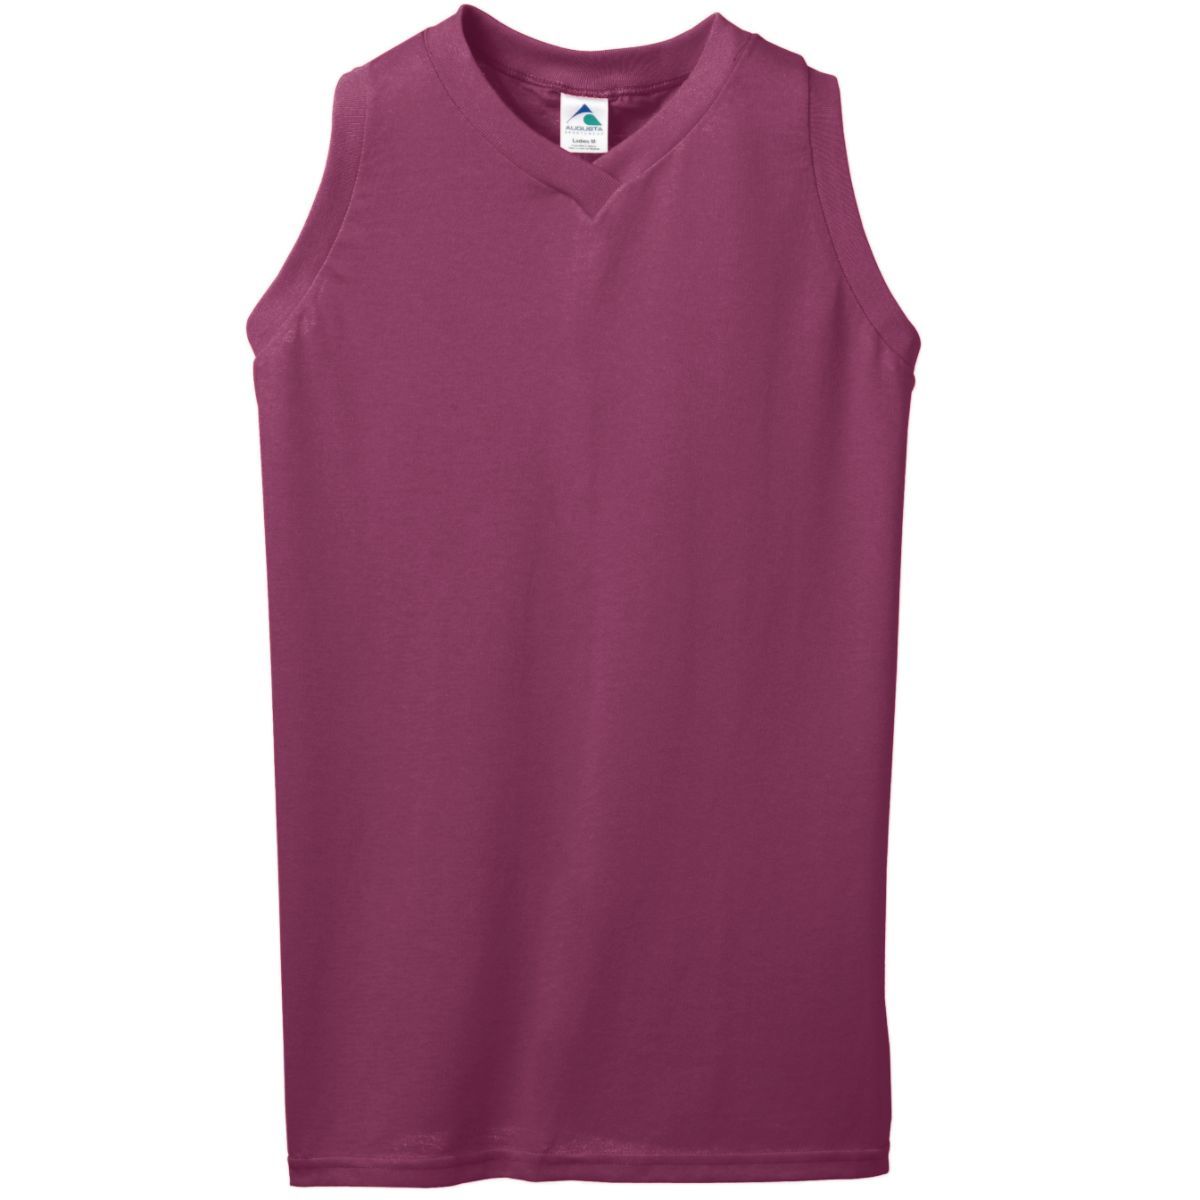 Augusta Sportswear Ladies Sleeveless V-Neck Poly/Cotton Jersey in Maroon  -Part of the Ladies, Ladies-Jersey, Augusta-Products, Tennis, Shirts product lines at KanaleyCreations.com